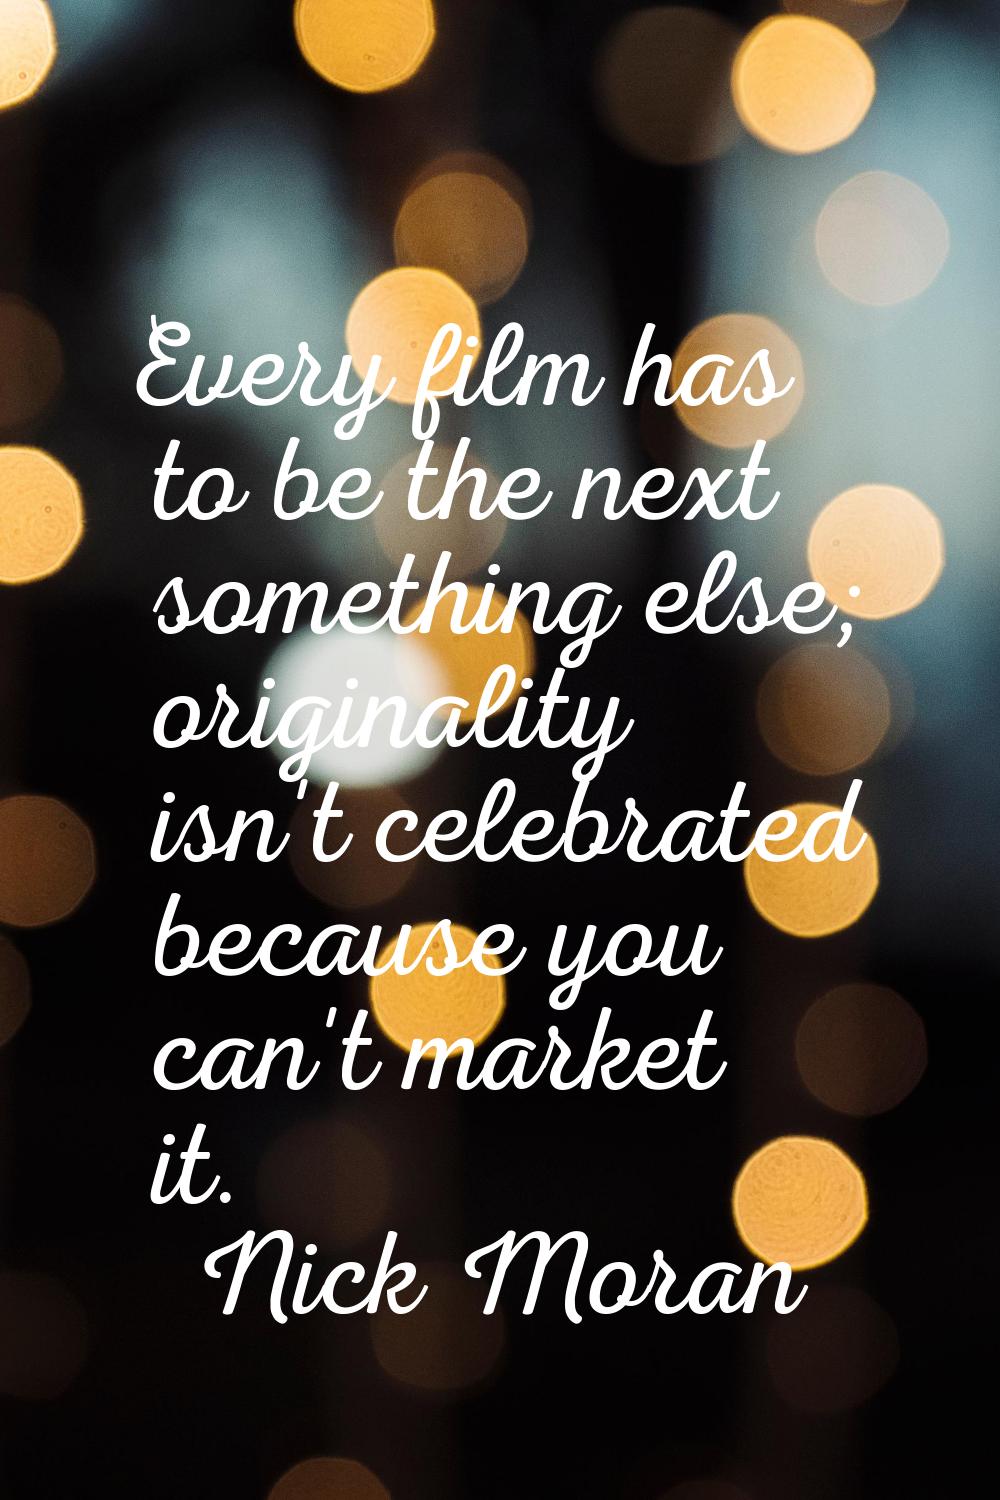 Every film has to be the next something else; originality isn't celebrated because you can't market